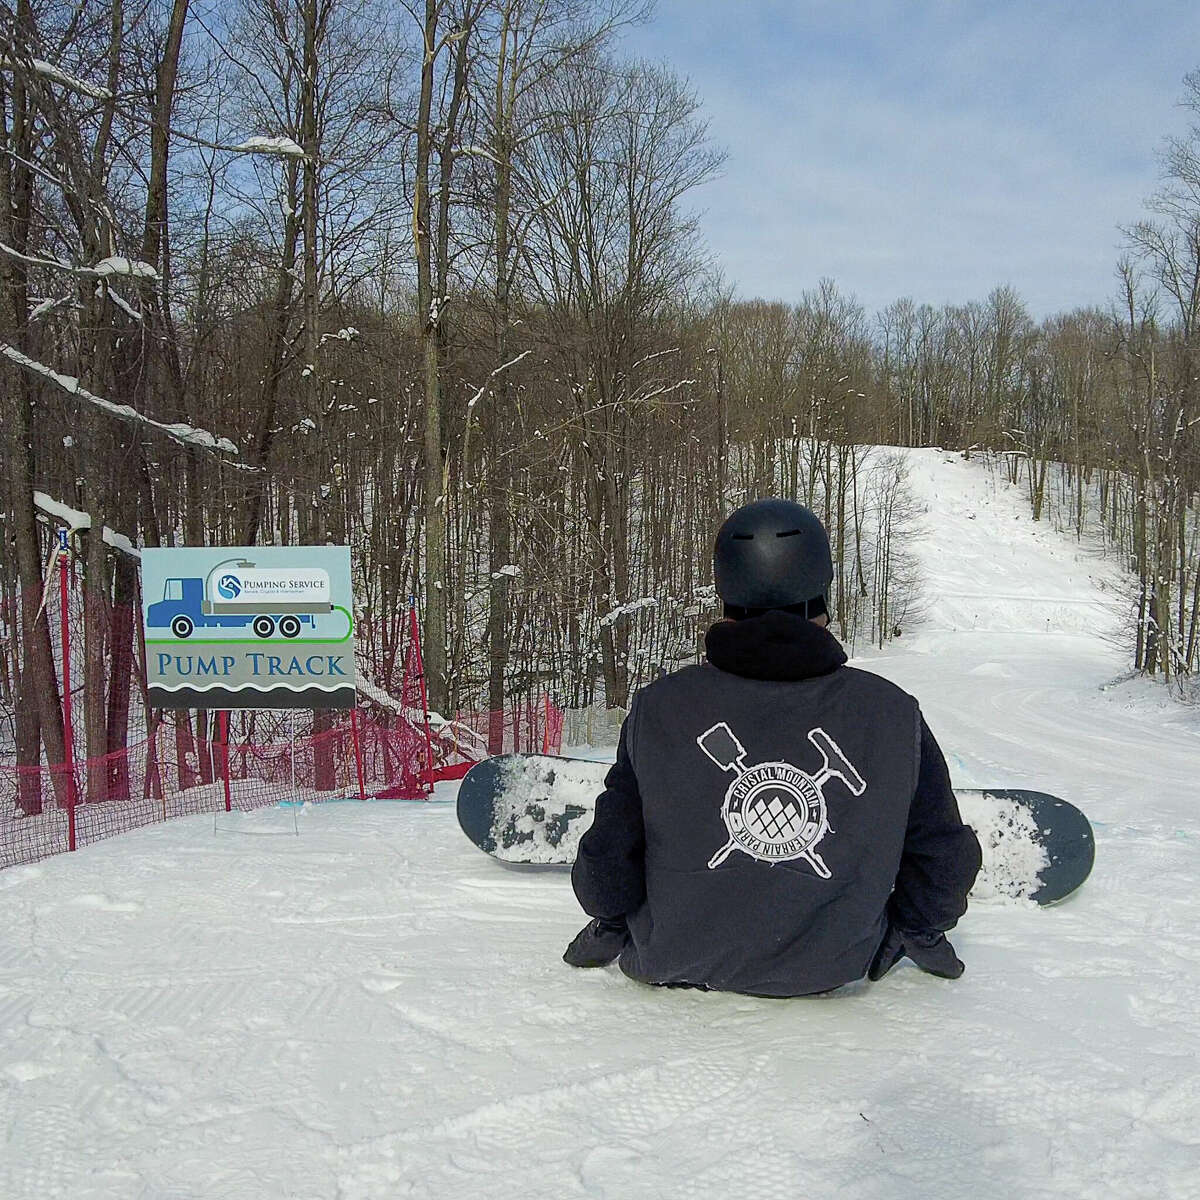 After its debut last year as the first ski and snowboard pump track in Michigan, The Pumping Service Pump Track has returned to Crystal Mountain.